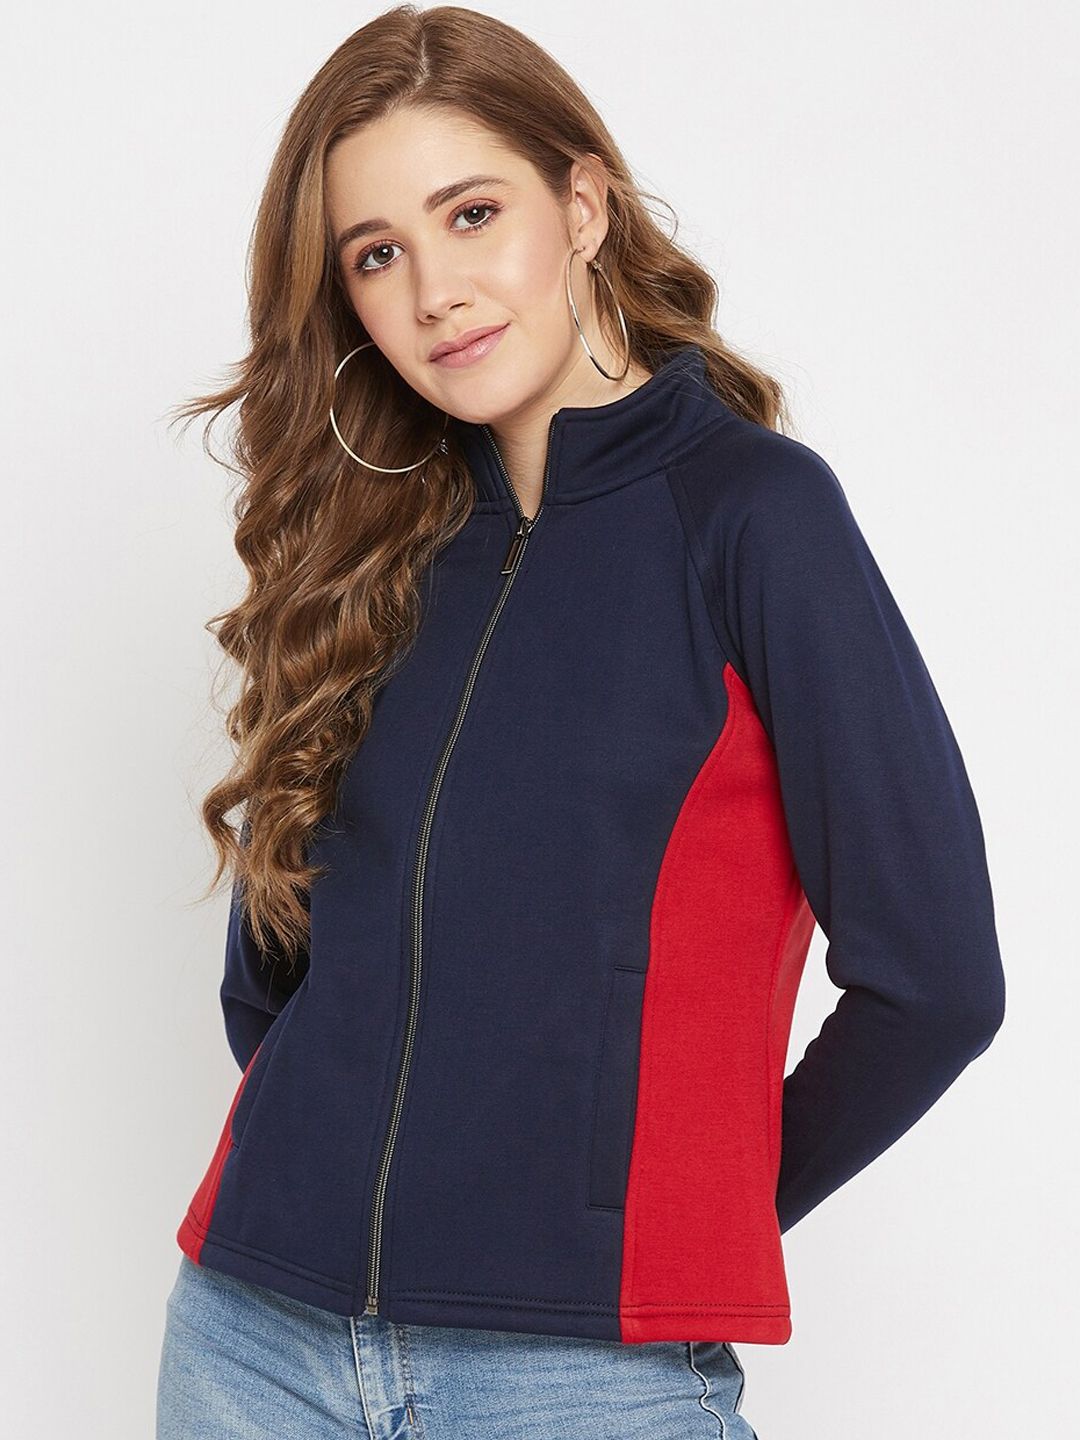 AGIL ATHLETICA Women Navy Blue & Red Colourblocked Tailored Jacket Price in India